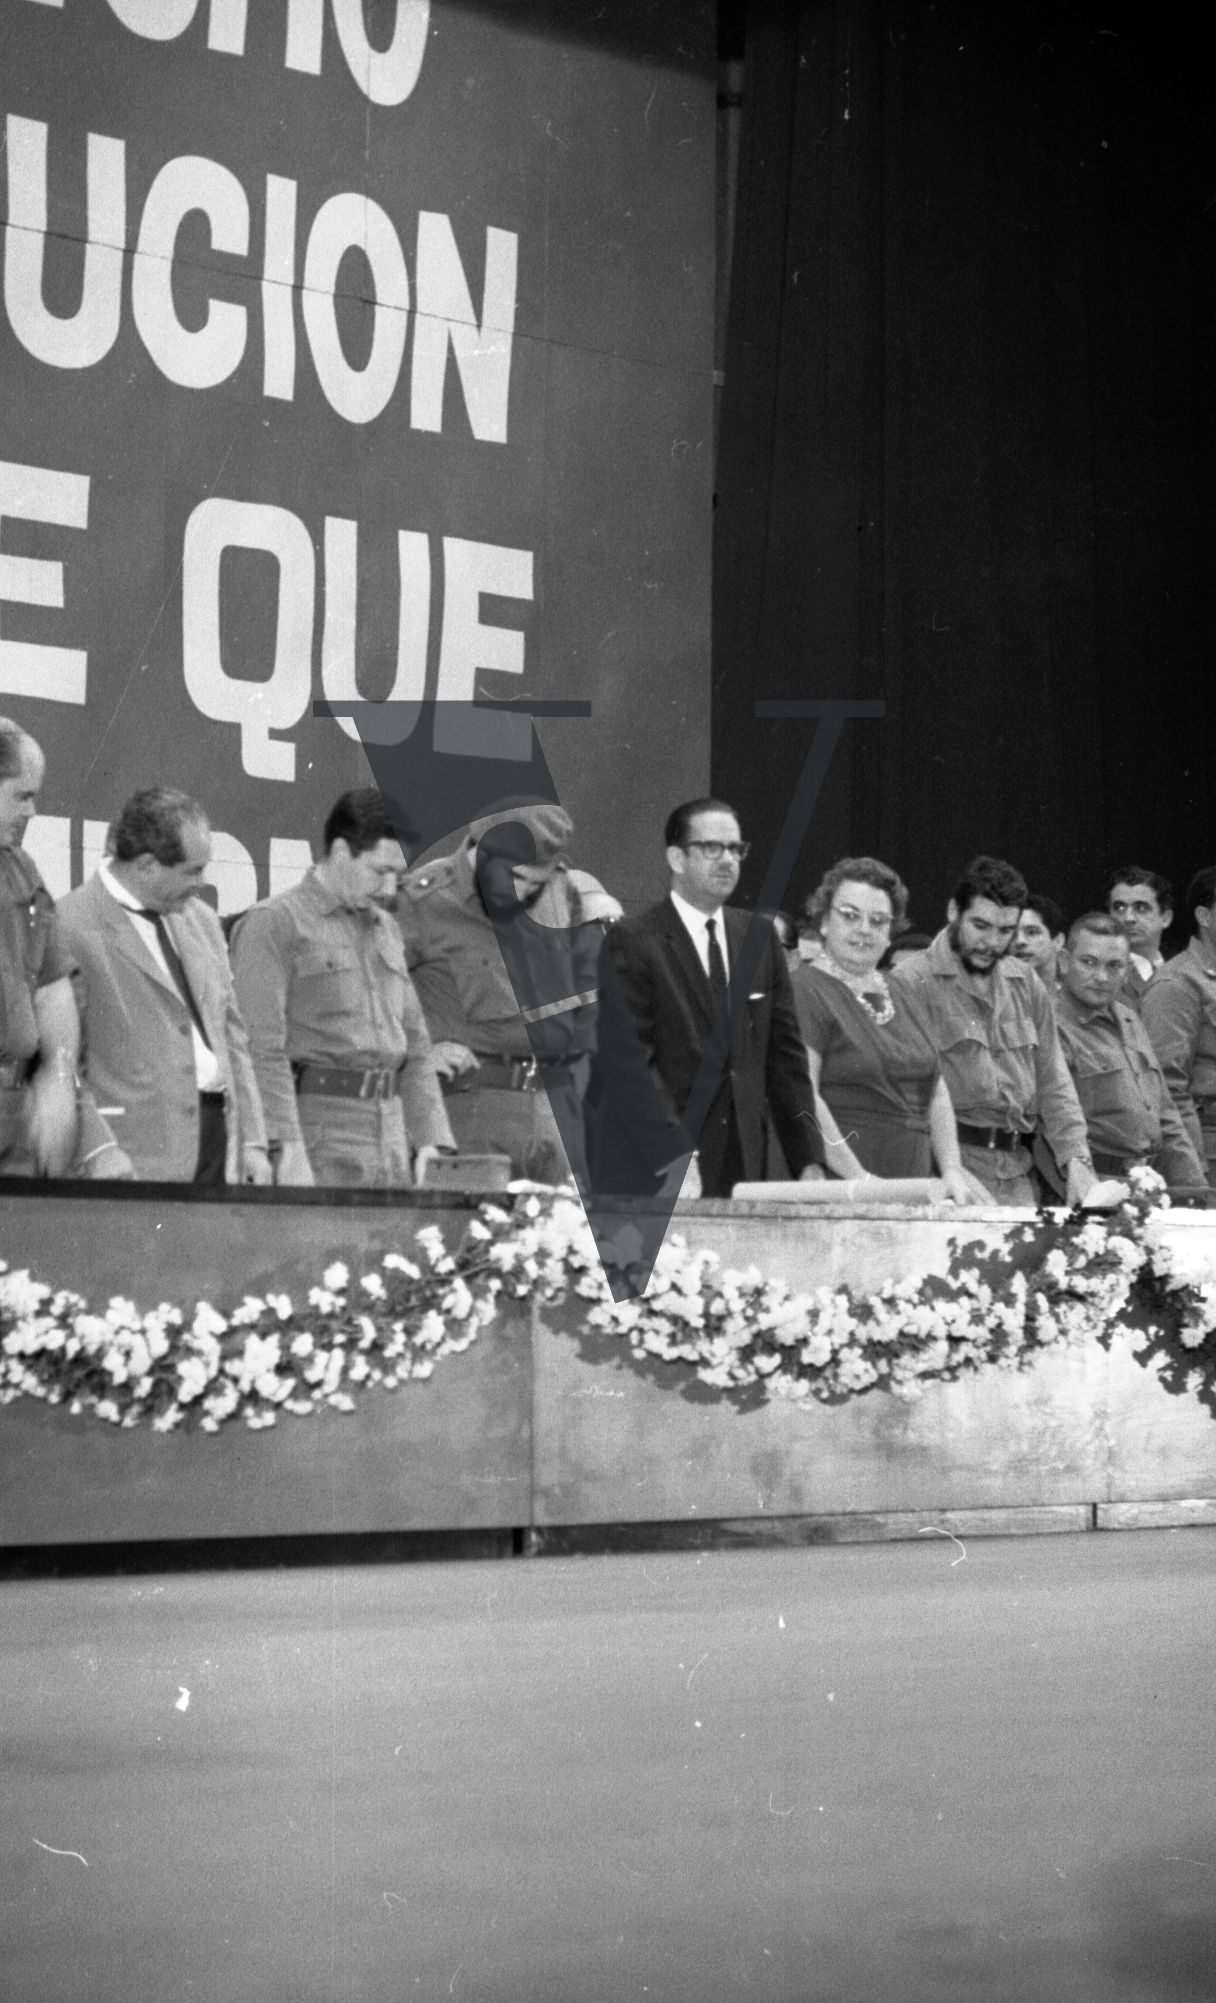 Cuba, Fidel Castro conference speech, government officials stand in line, Castro inspects.